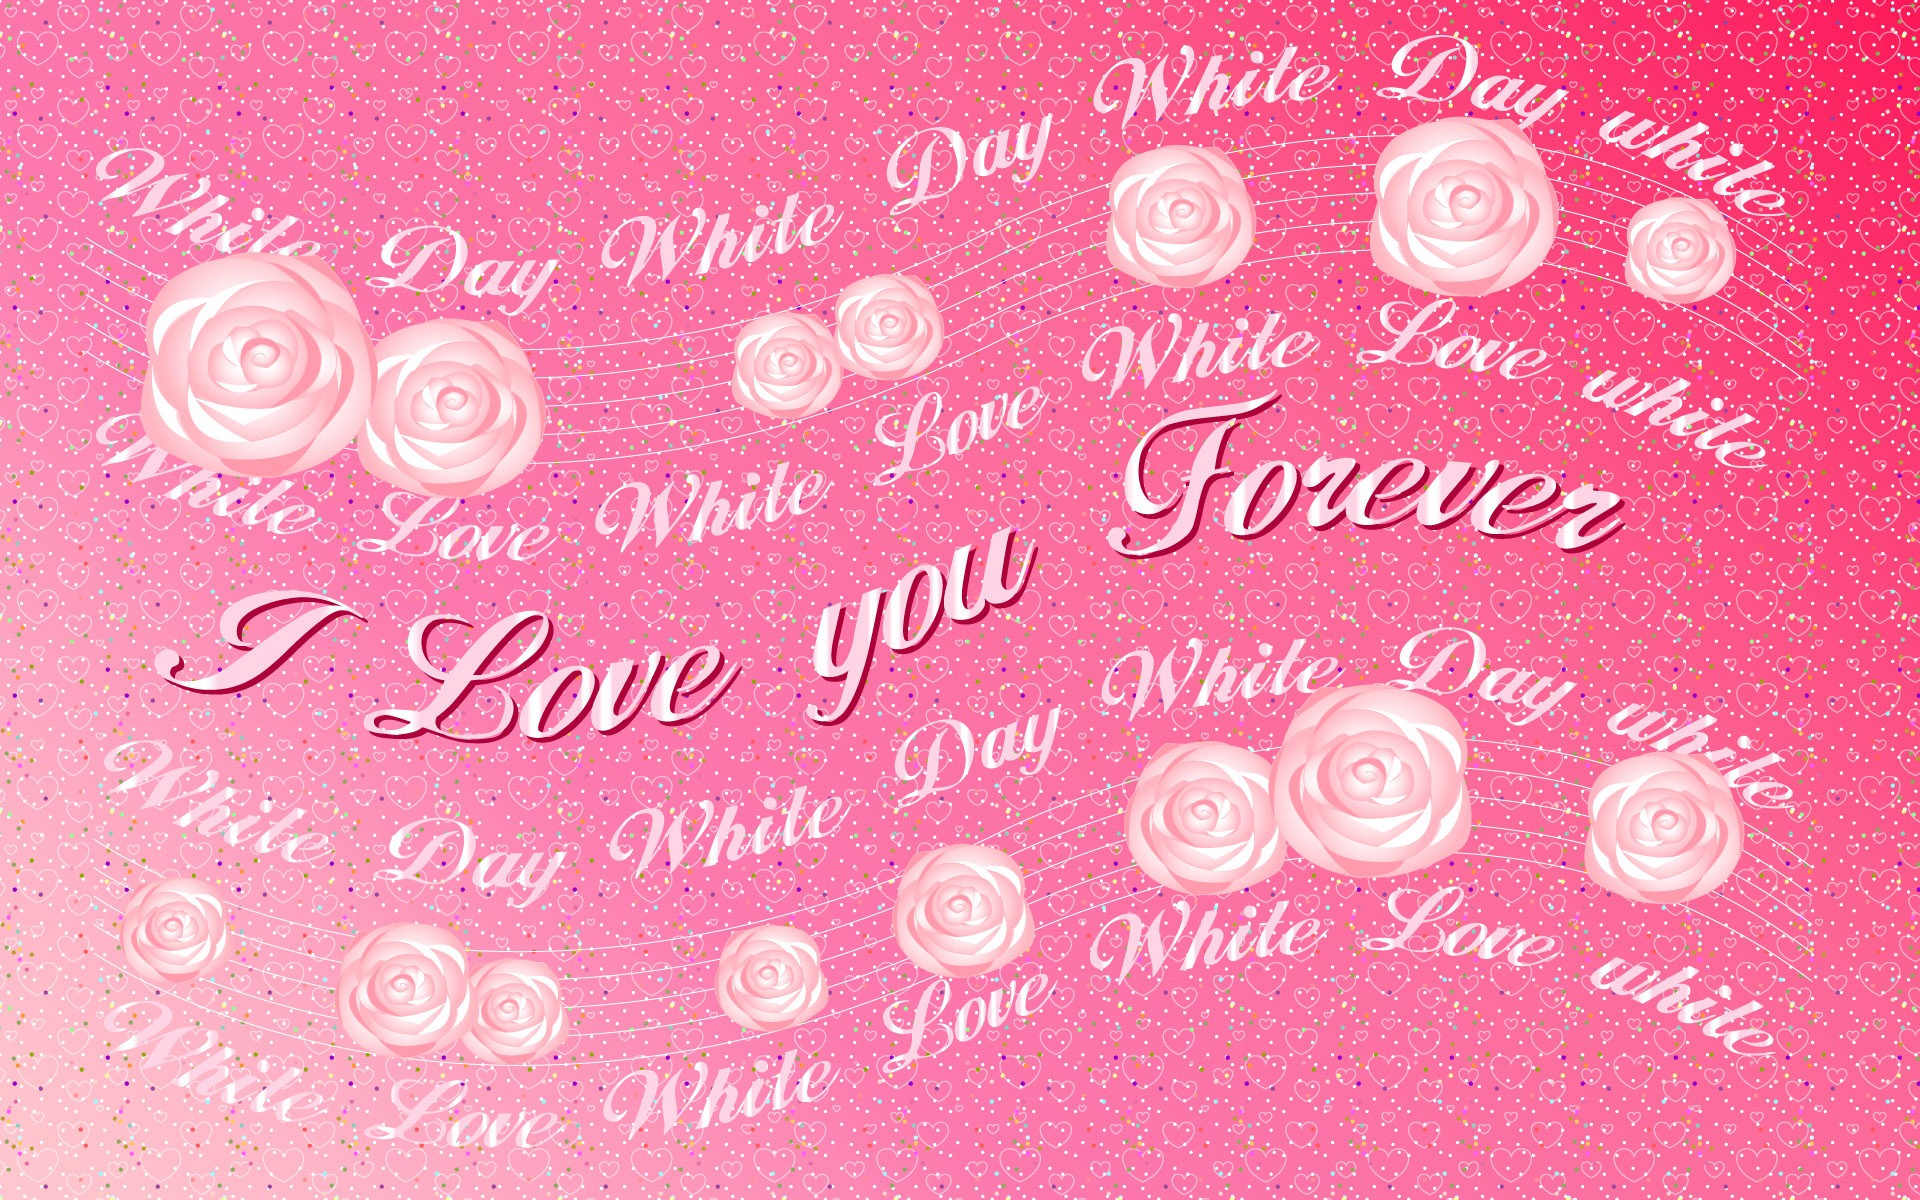 Valentine's Day Theme Wallpapers (2) #6 - 1920x1200